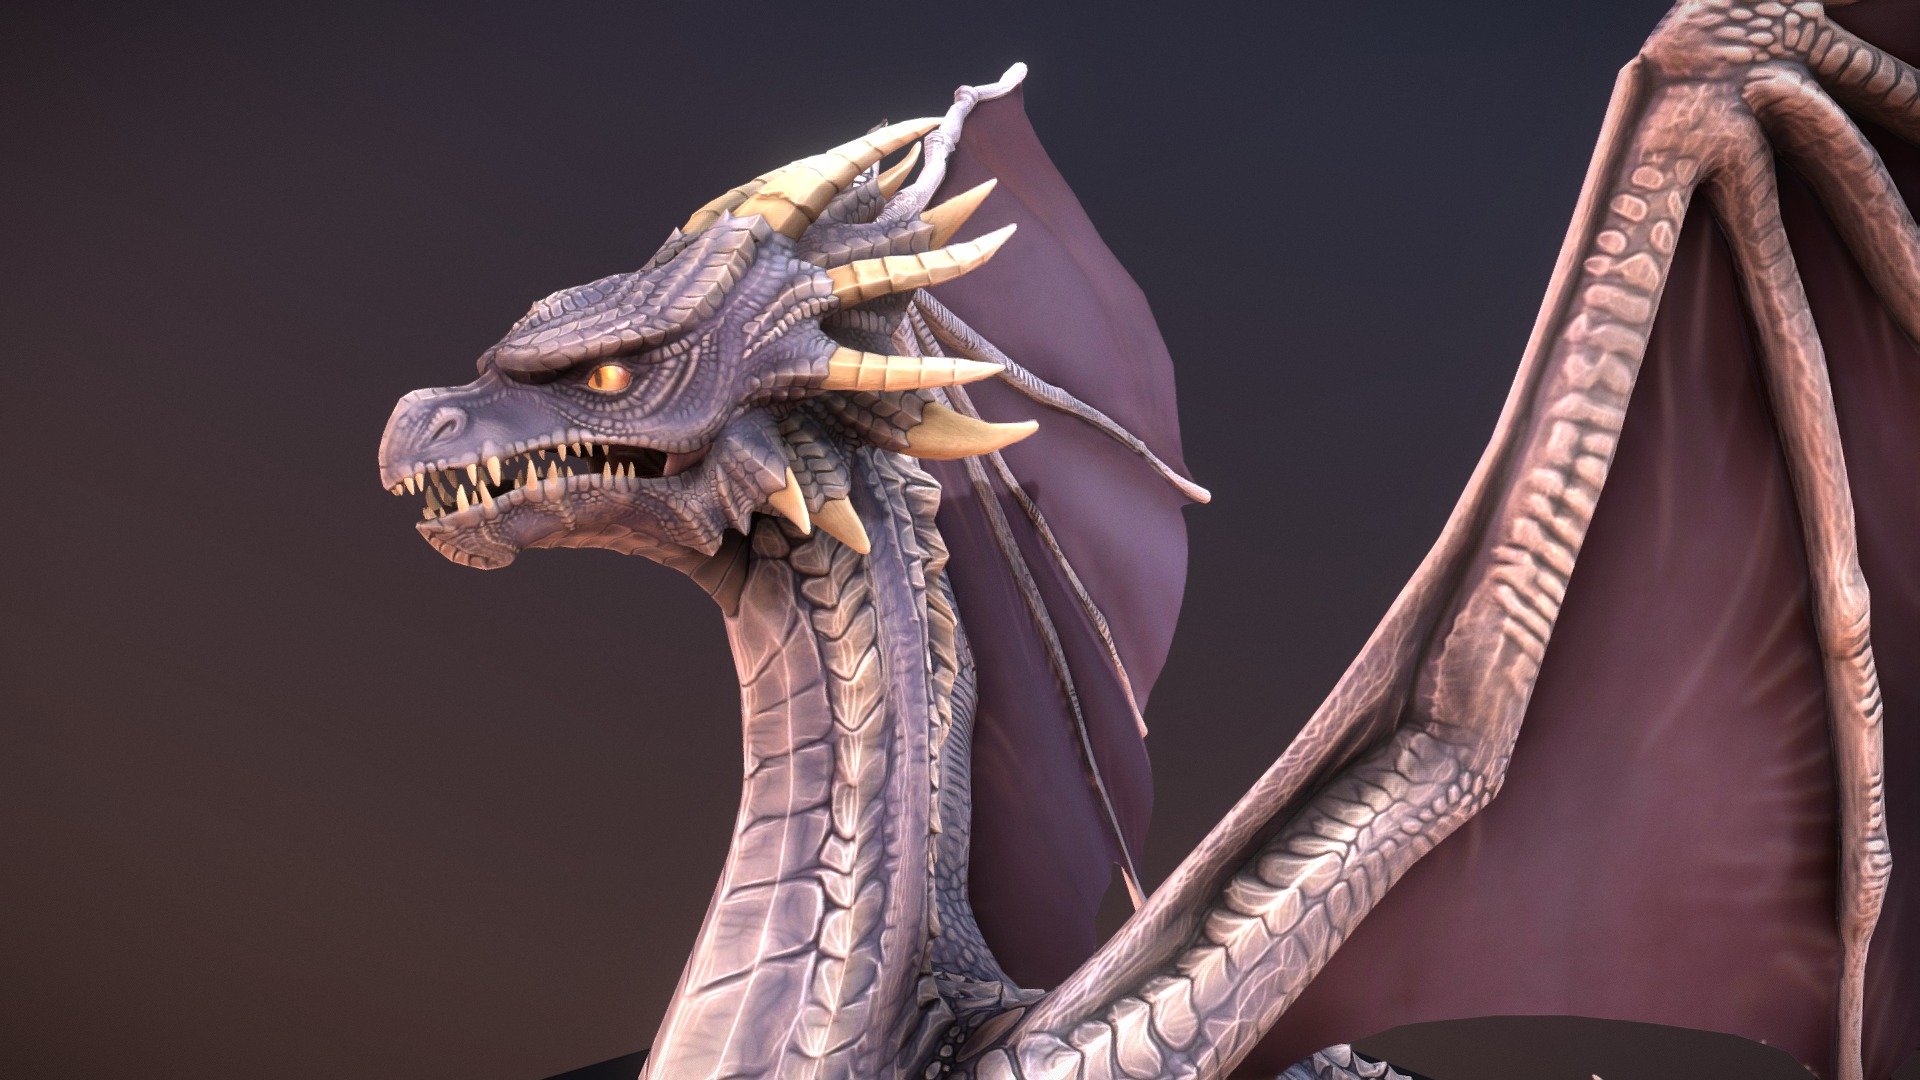 Personal Project during my freetime. a Stylize purple dragon that looks like an older spyro 3d model